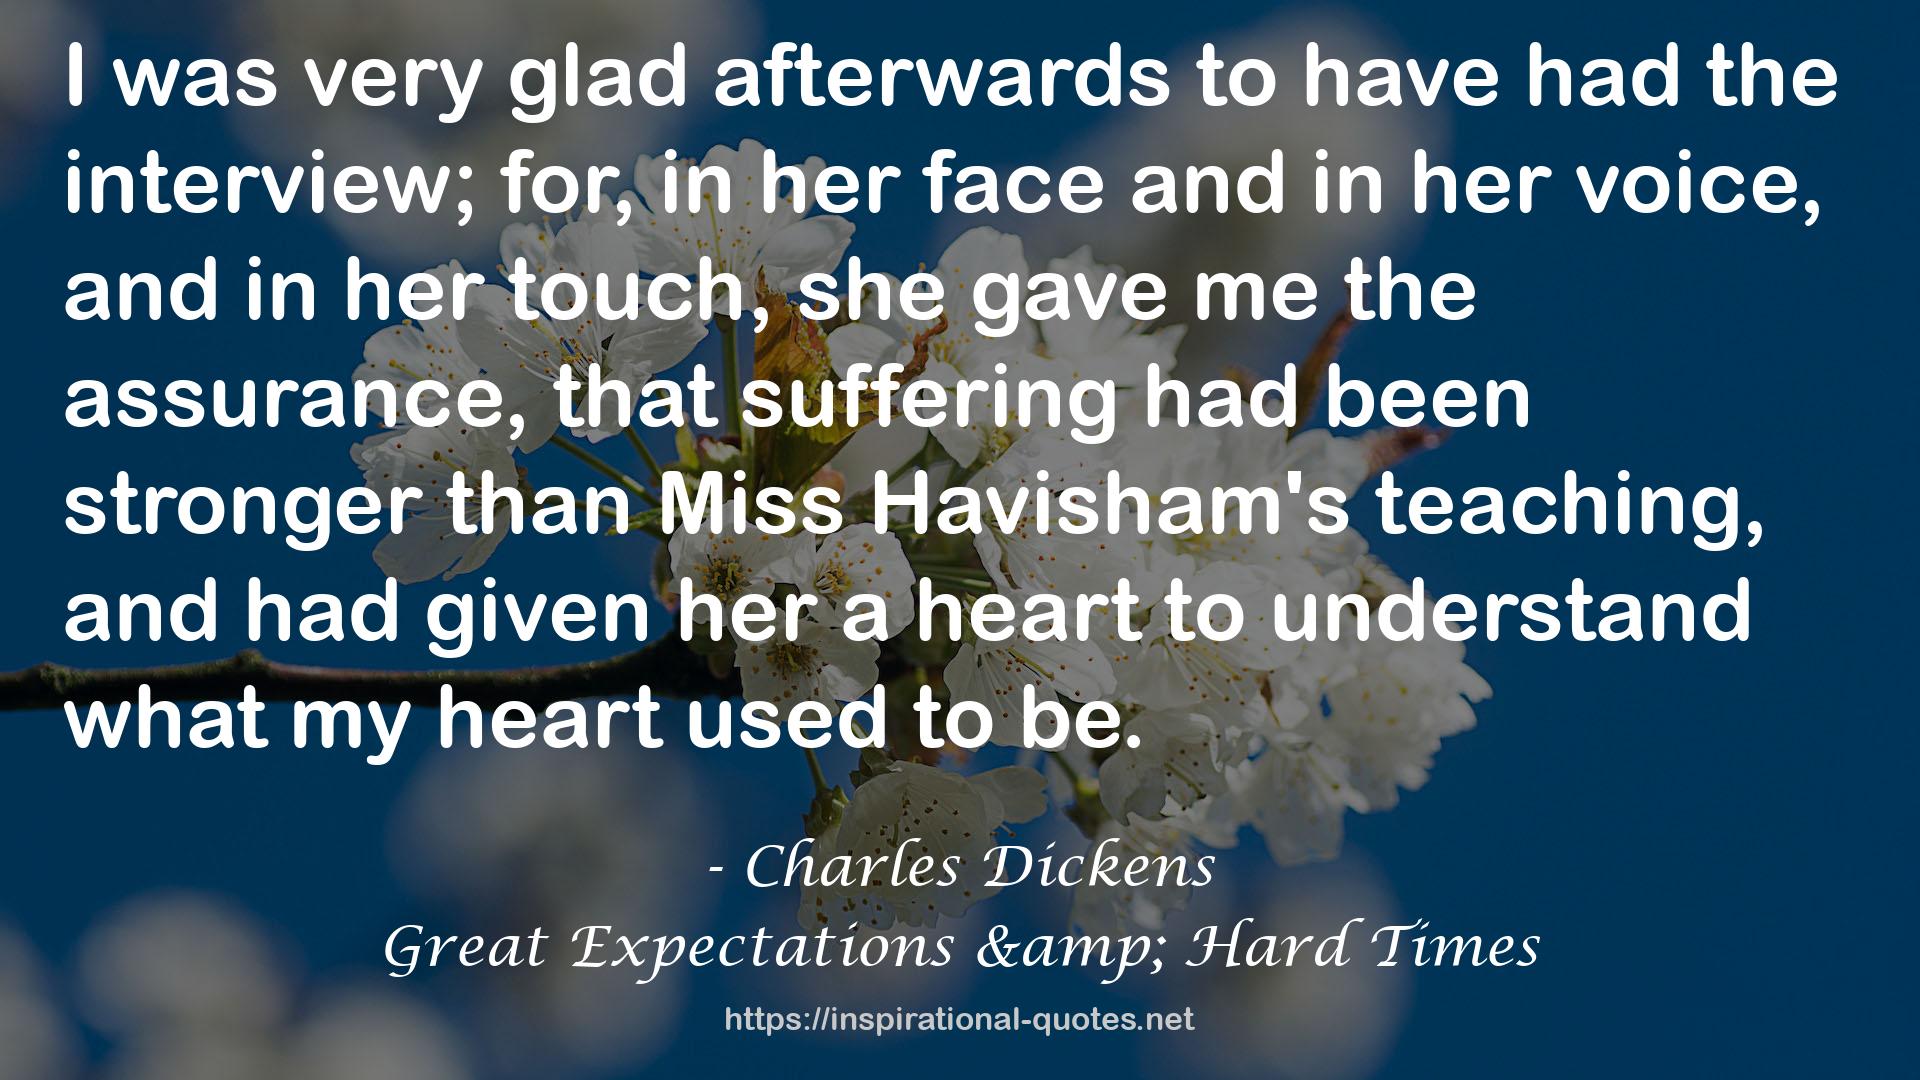 Great Expectations & Hard Times QUOTES